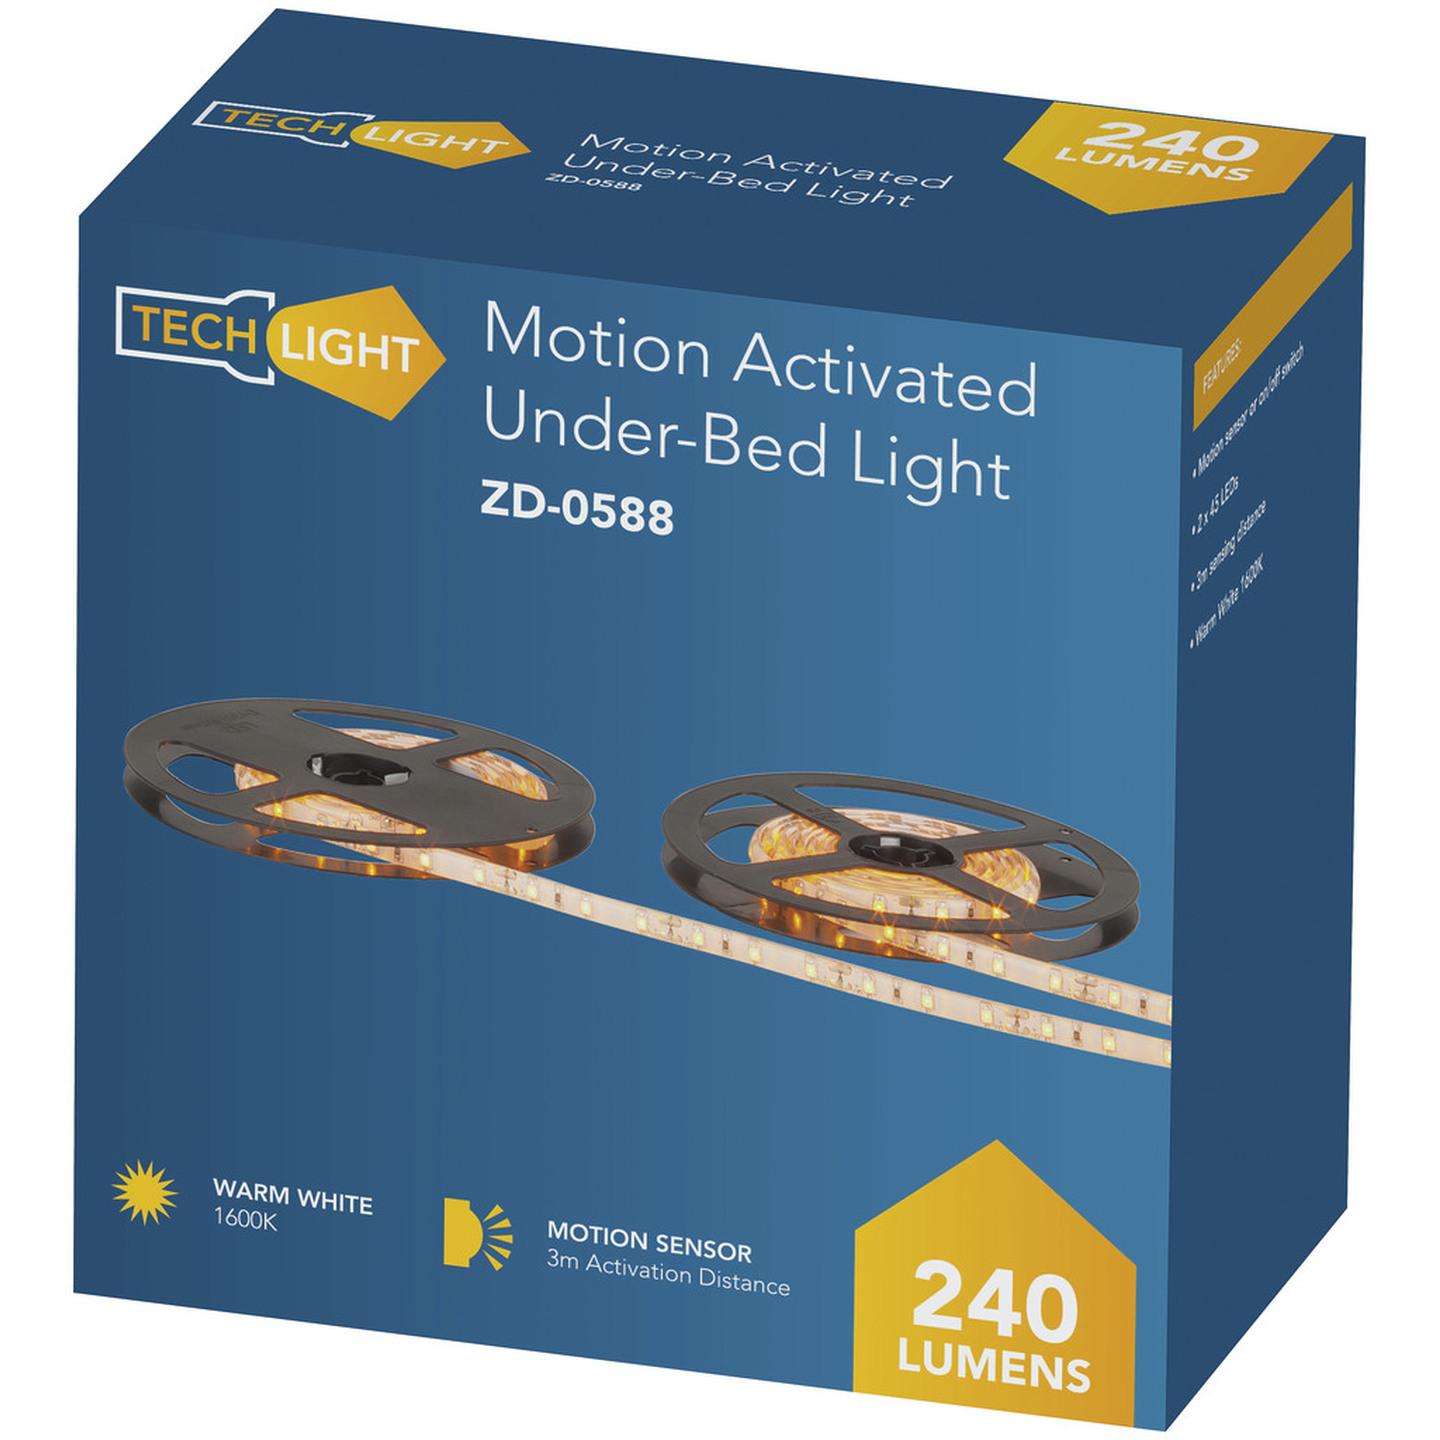 Motion Activated Under-Bed LED Light Strips